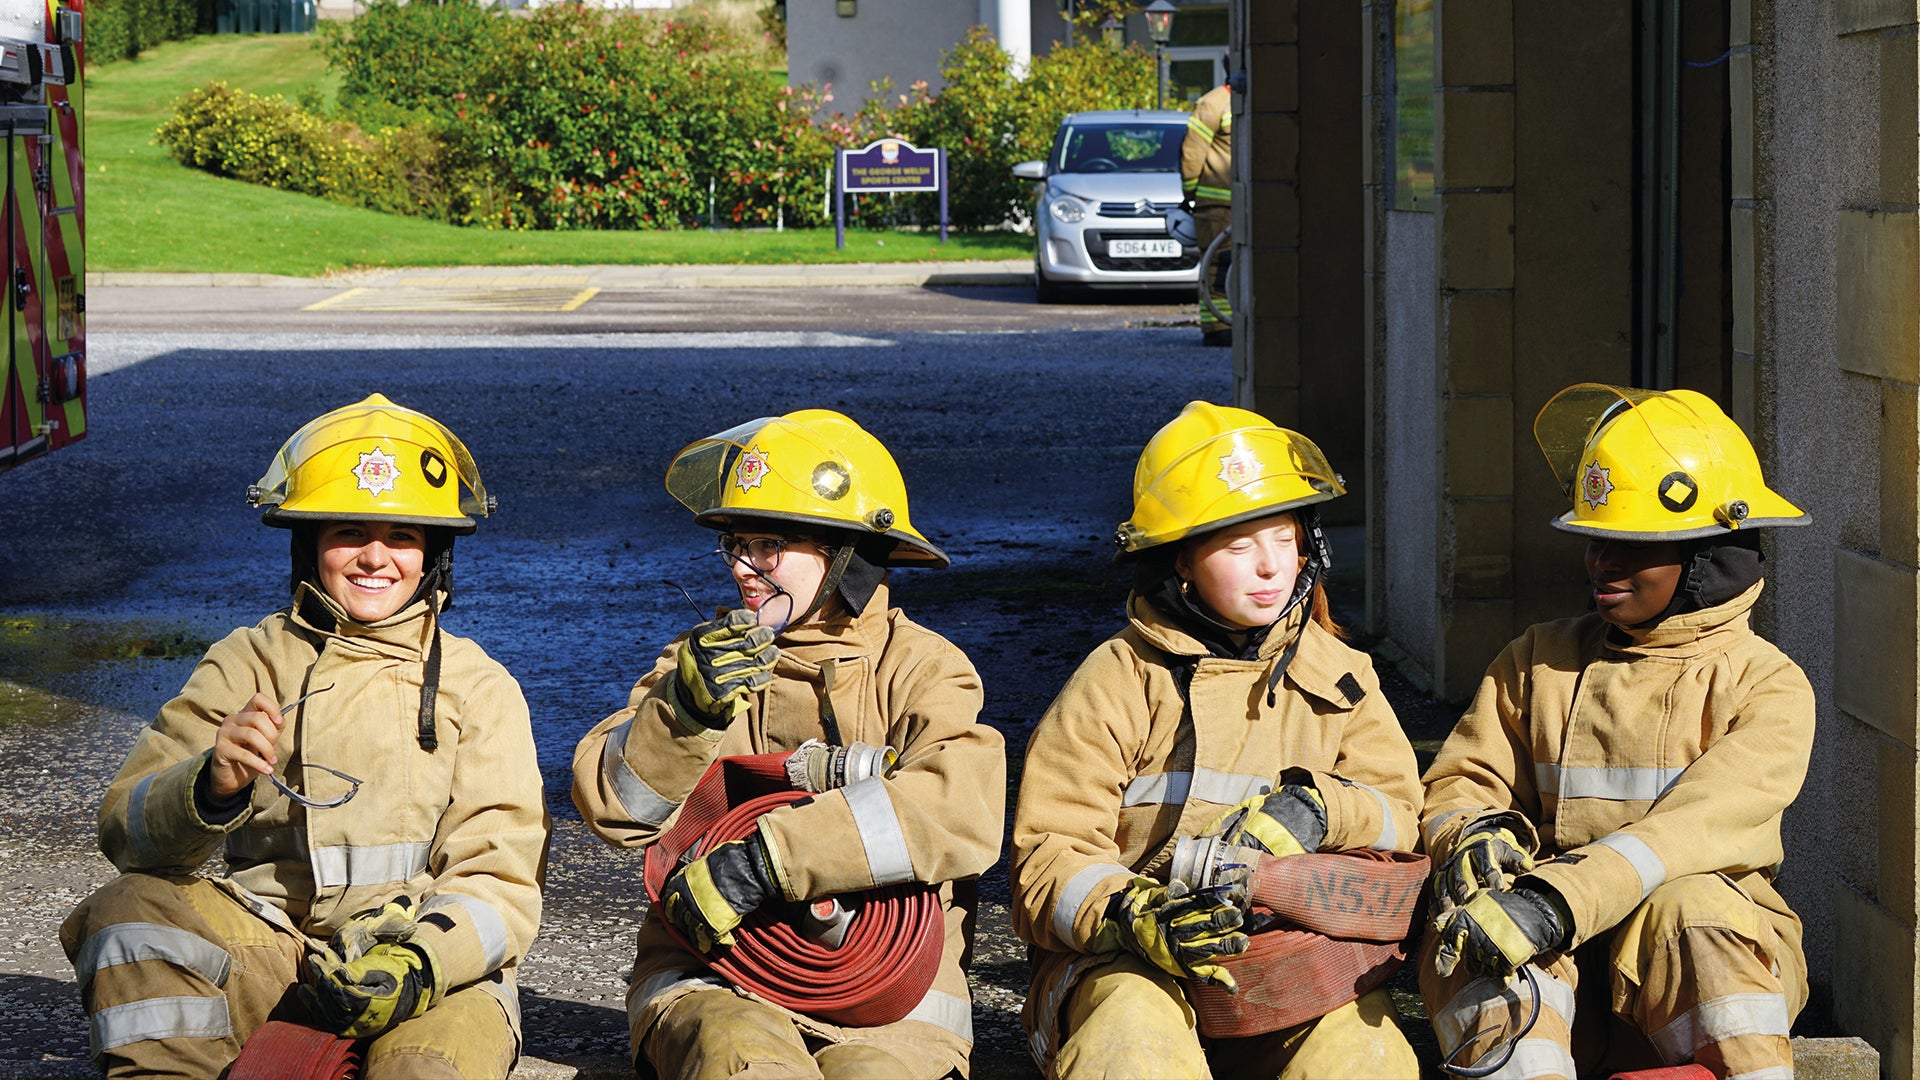 Gordonstoun’s volunteer fire service has been awarded The Queen’s Award for Voluntary Service – the highest award a local voluntary group can receive in the UK and is equivalent to an MBE (Gordonstoun/PA)